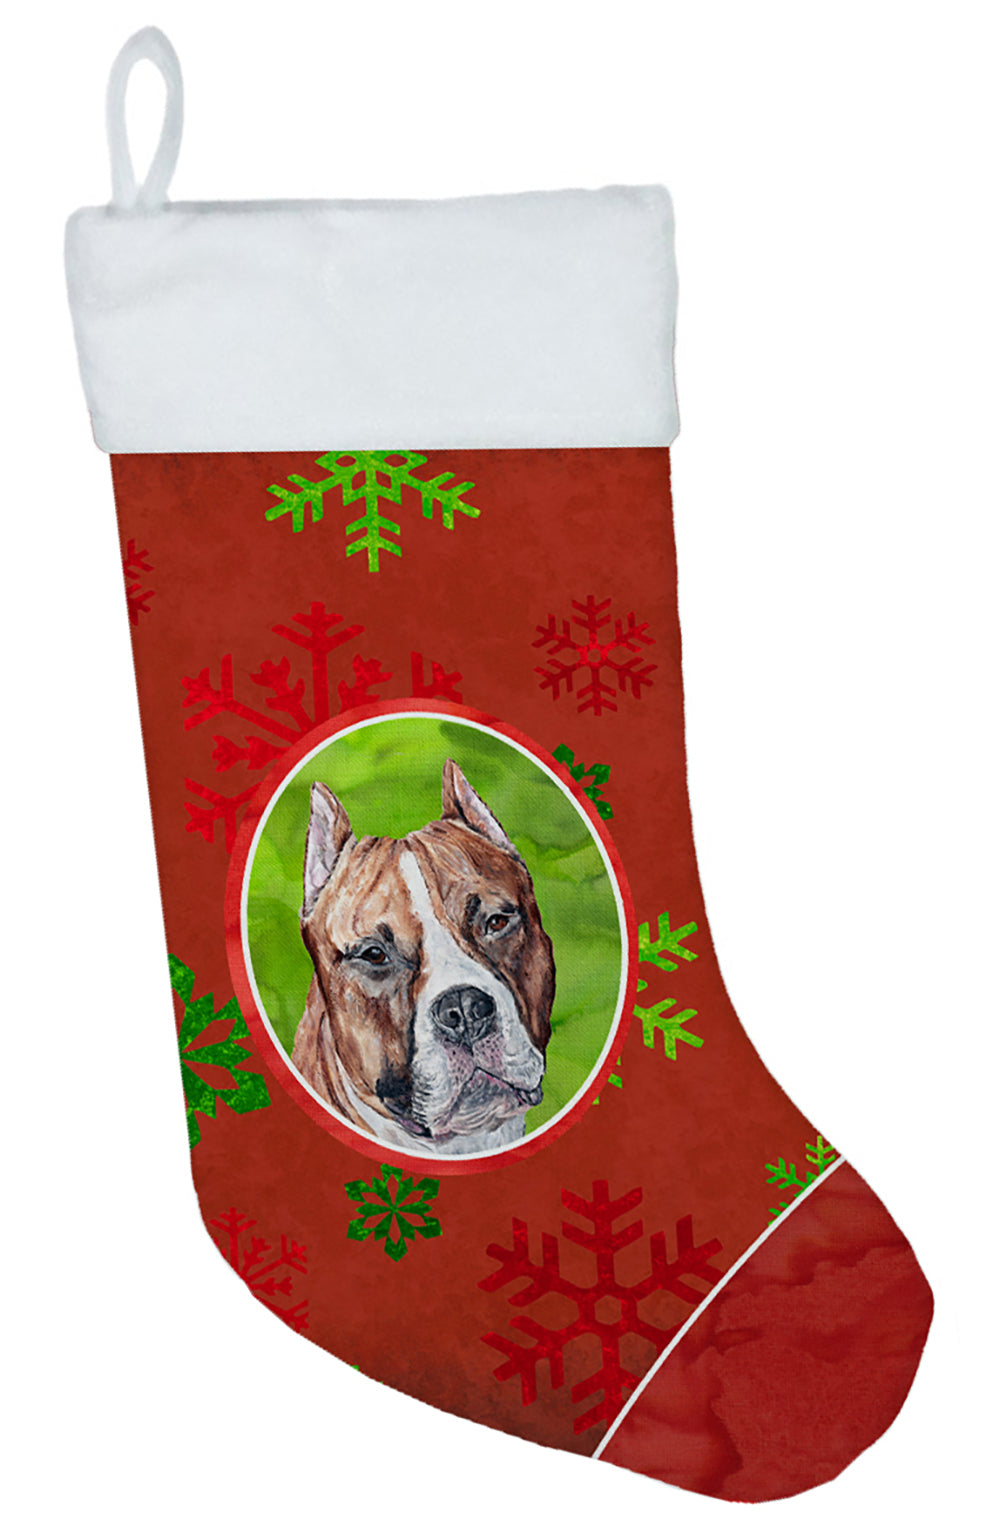 Staffordshire Bull Terrier Staffie Red Snowflakes Holiday Christmas Stocking SC9752-CS